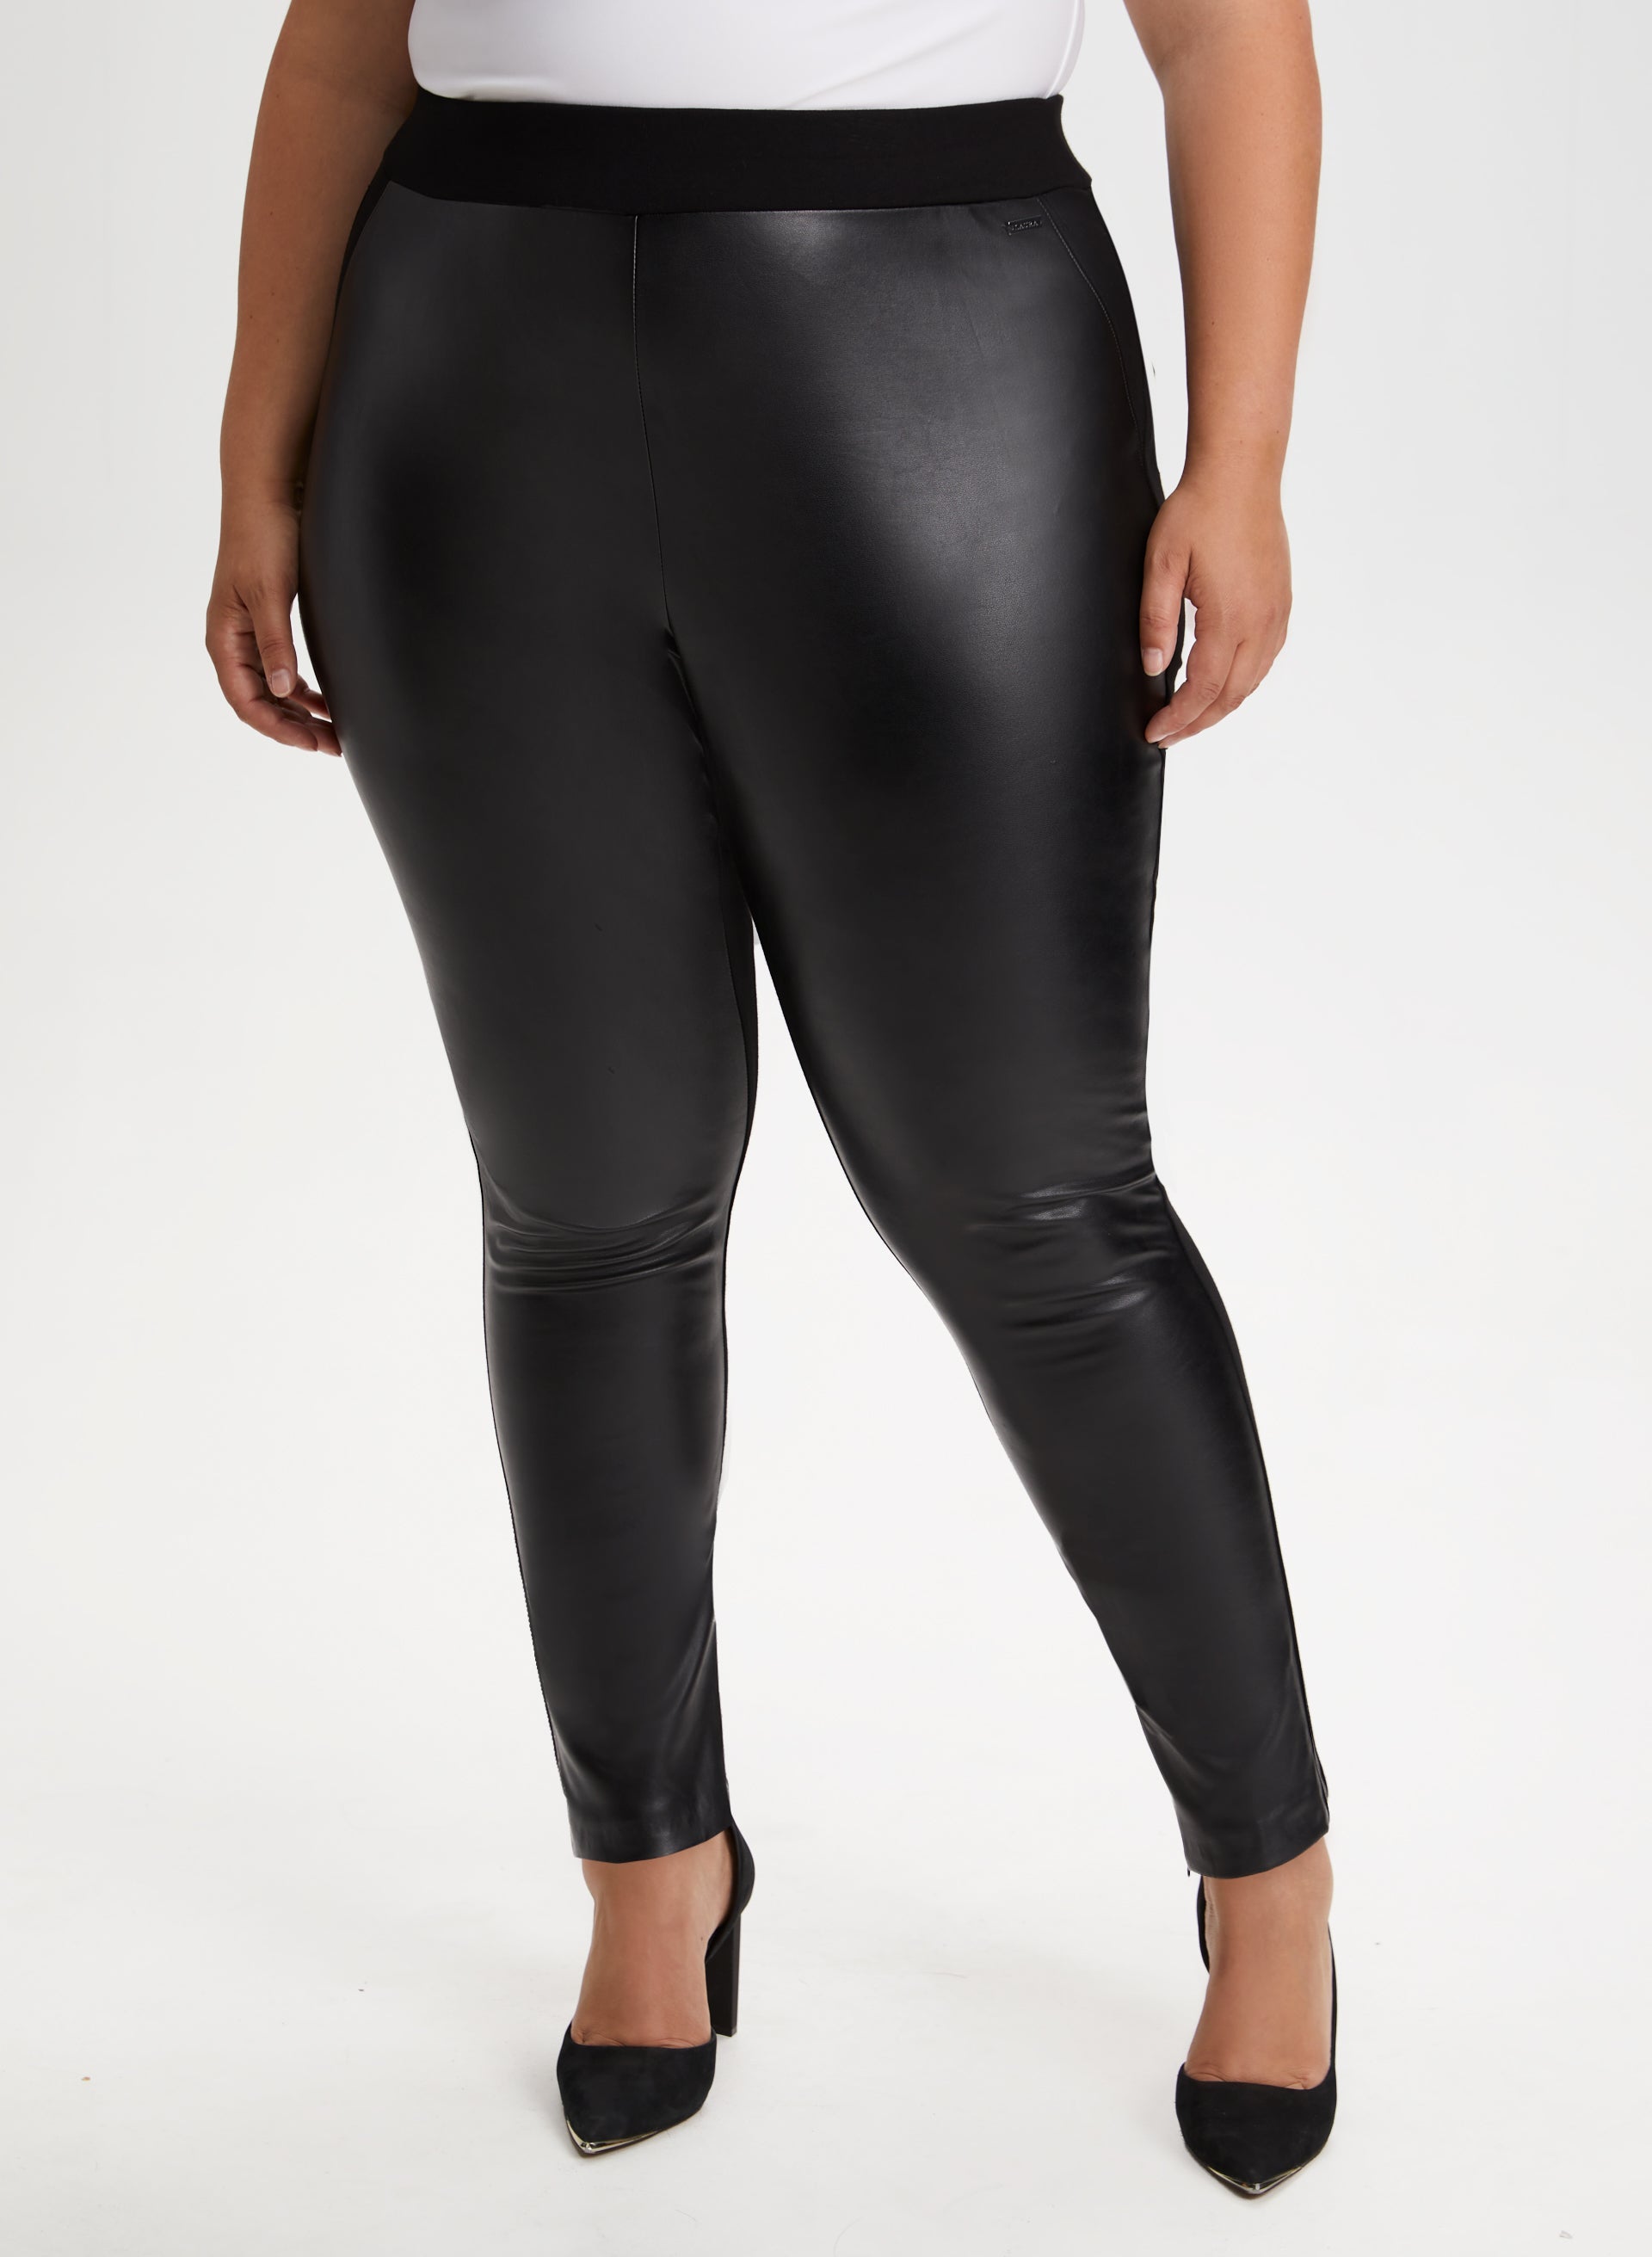 Buy Friends Like These Black Black Faux Leather Flare Leggings